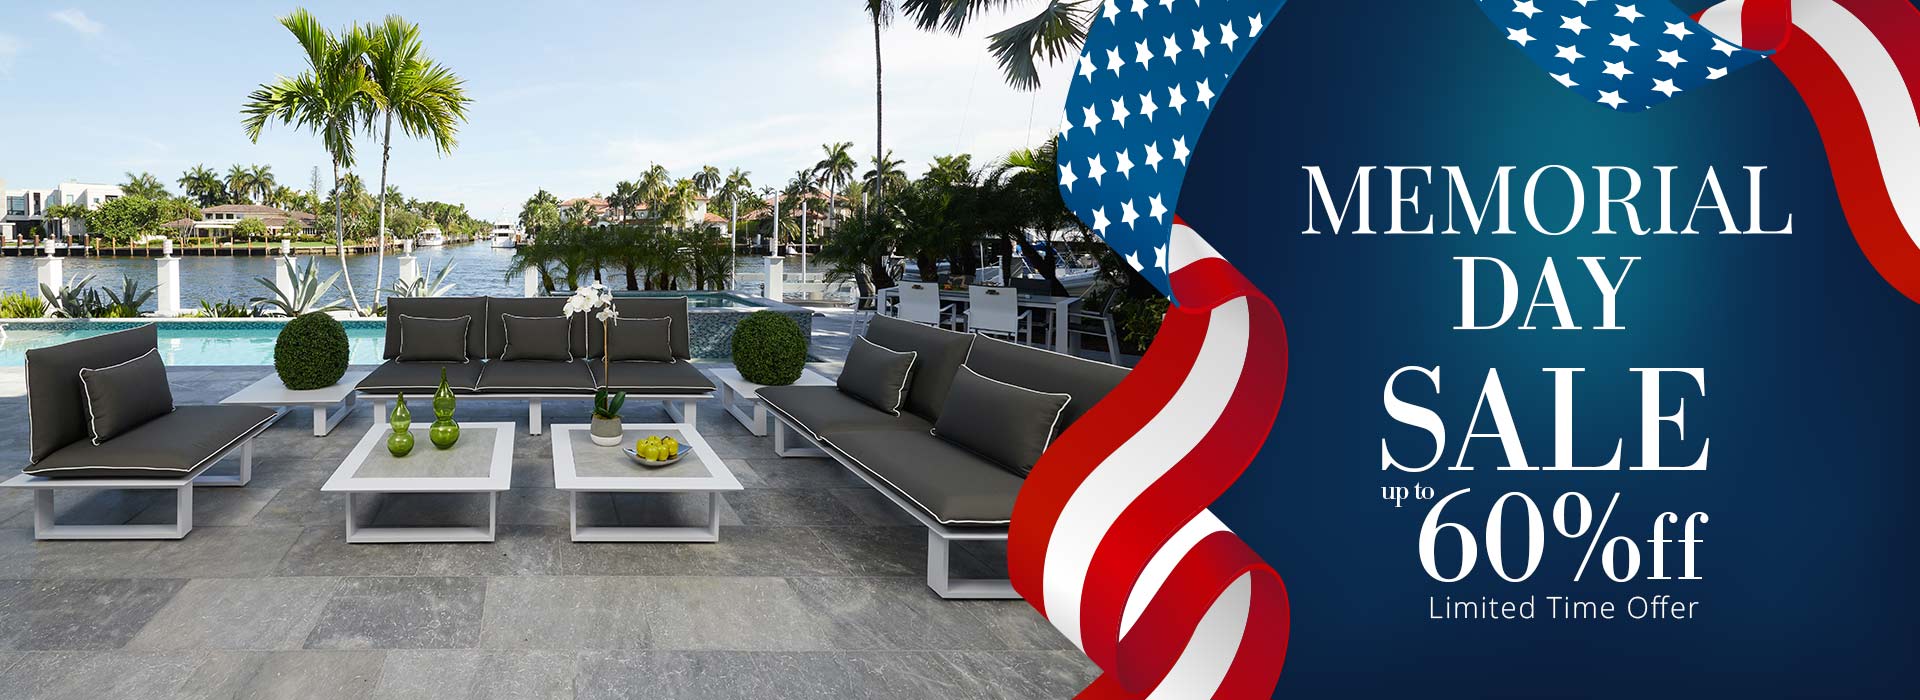 Memorial Day Sale. Ten to sixty percent off selected Indoor and Outdoor Furniture and Accessories.